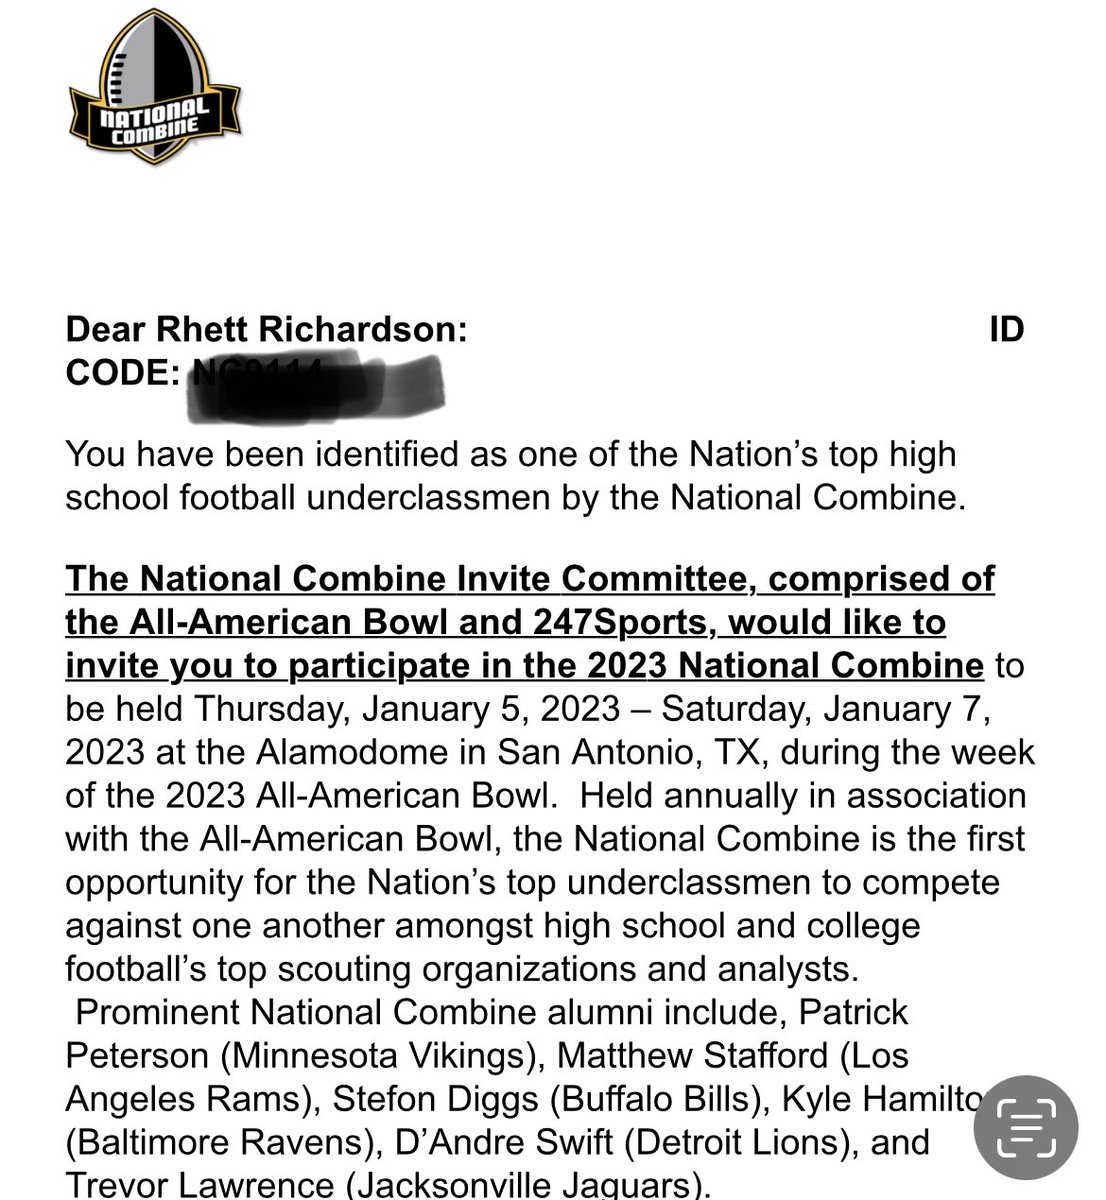 Honored to be invited to the 2023 National Combine. Looking forward to competing. @NationalComb1ne @AABonNBC @FBUcamp @ErikRichardsUSA @HB_WildcatFB @247recruiting